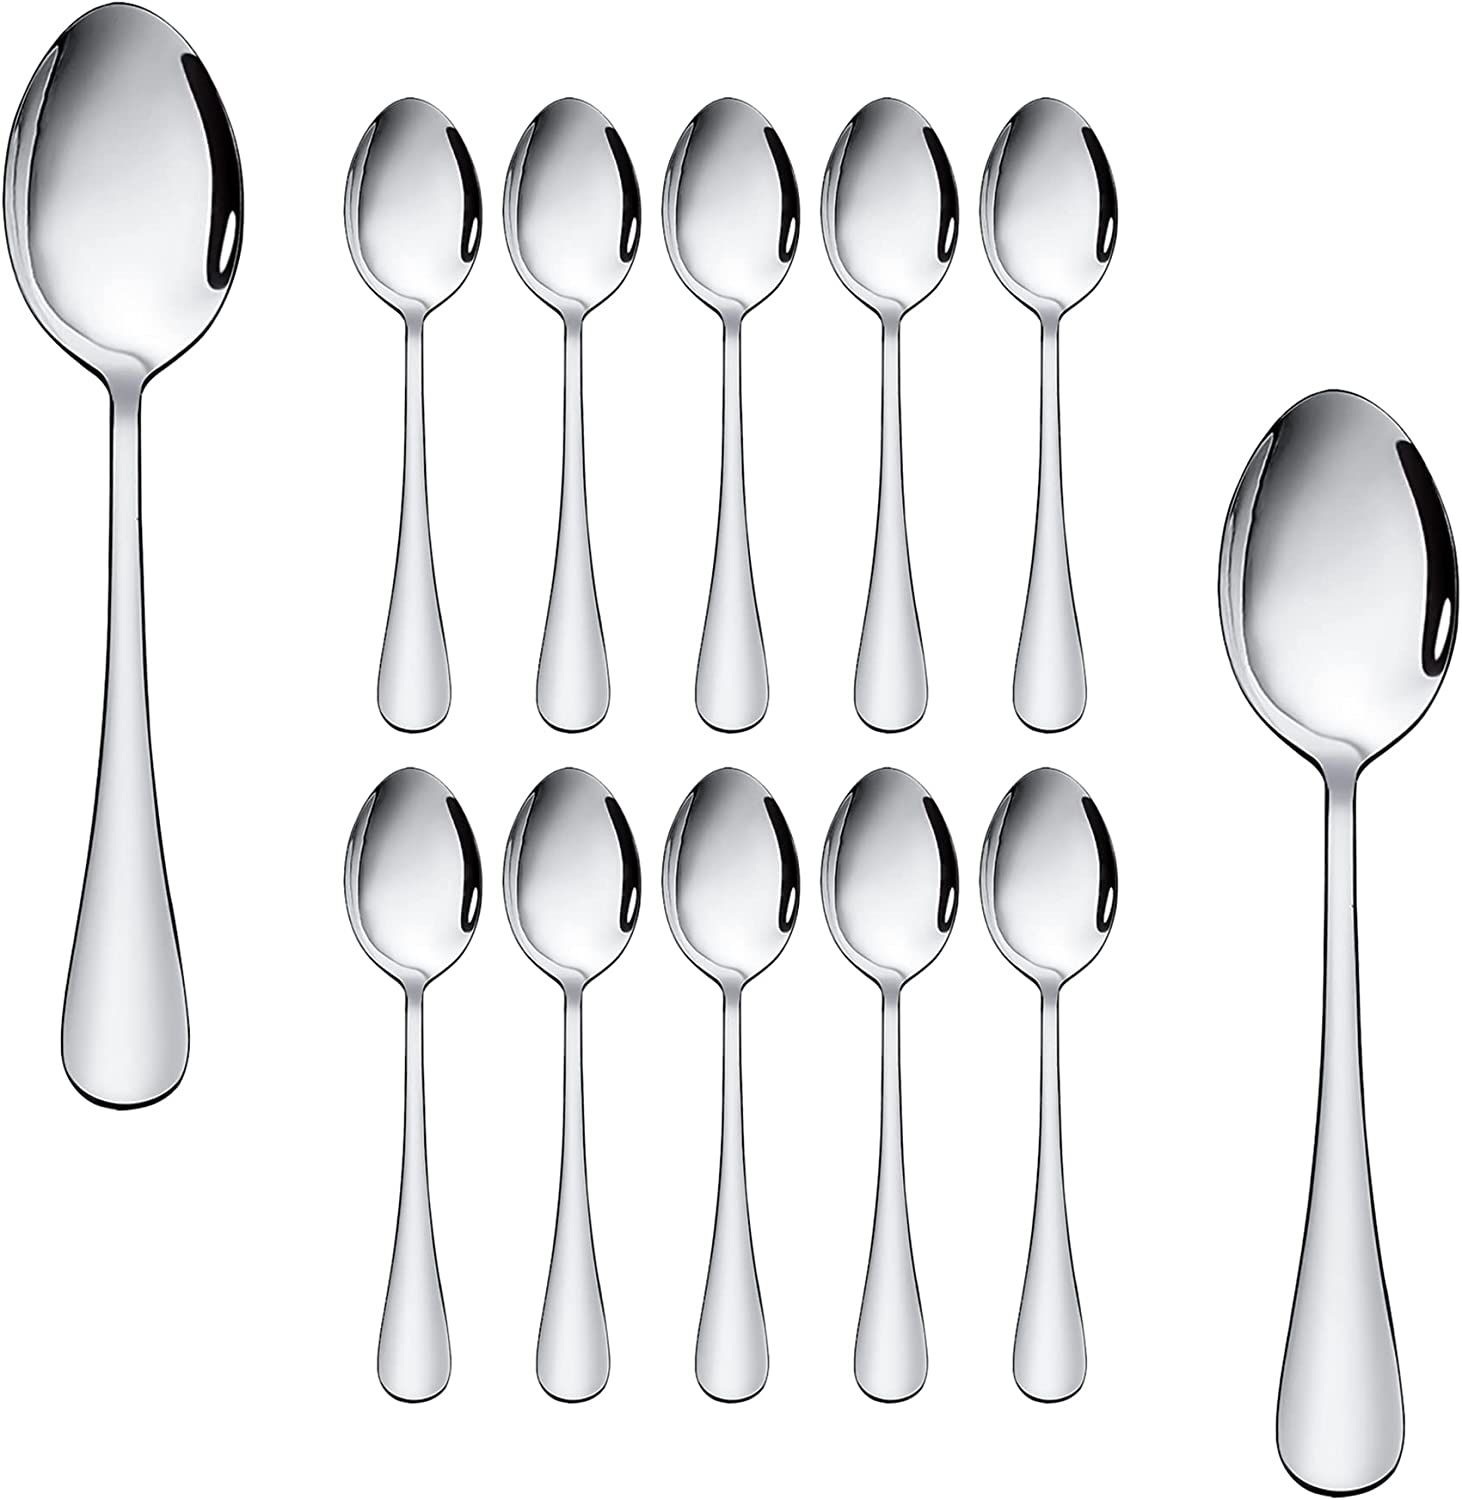 Stainless Steel 12-Piece Teaspoon Set, Table Dessert Spoons Pack for 12 (Silver 6.7 Inches)